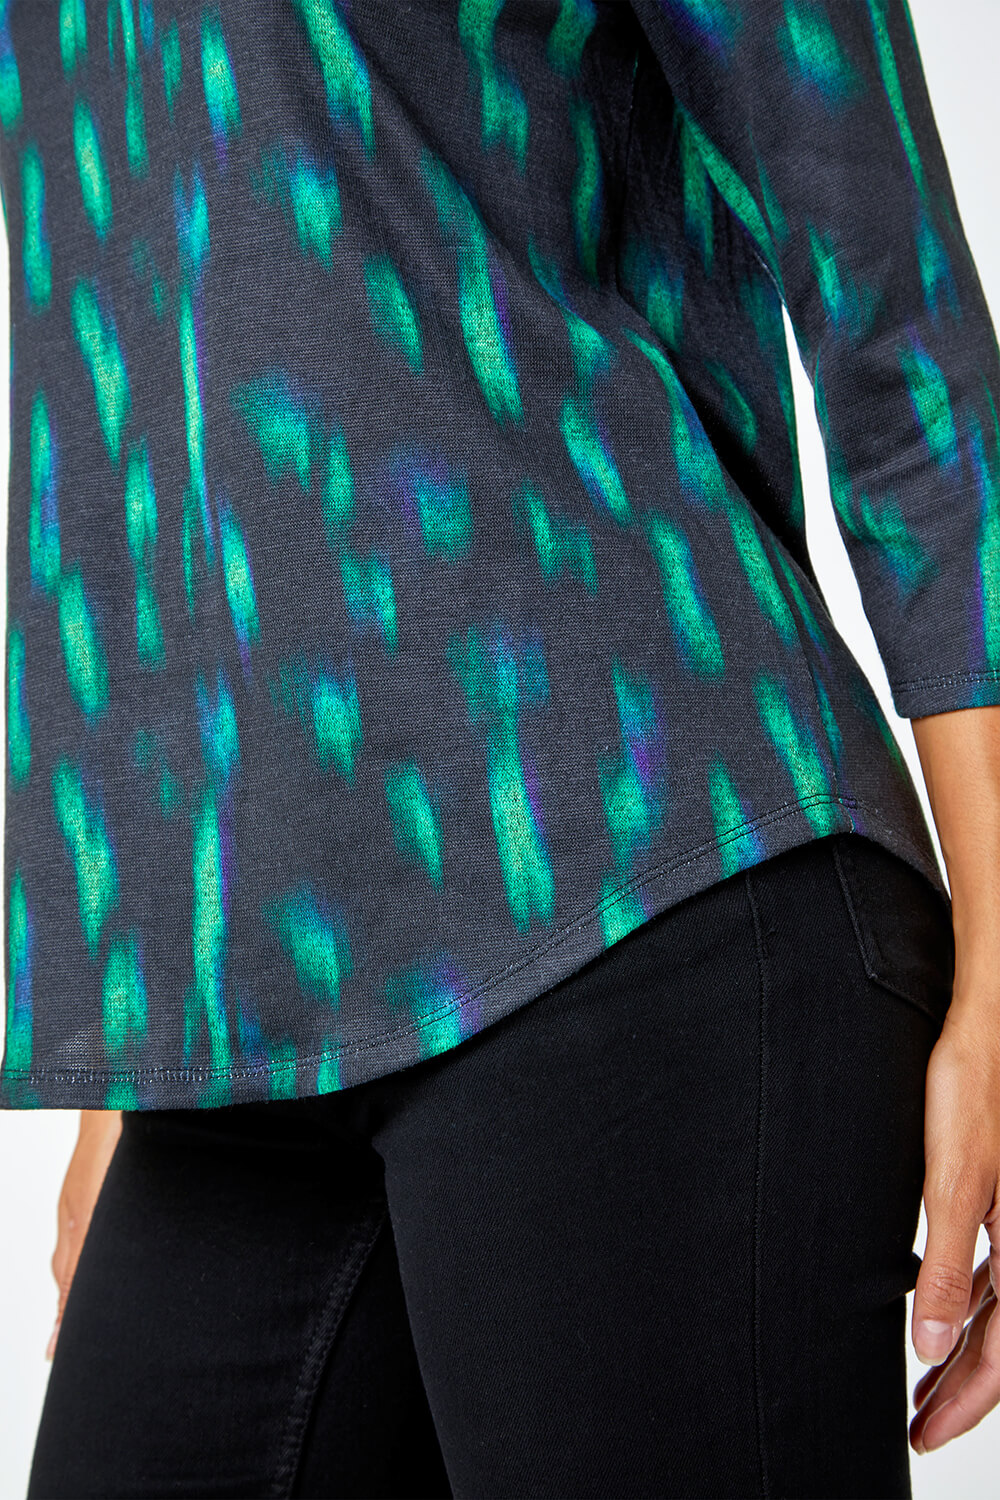 Green Abstract Scoop Hem Stretch Top, Image 5 of 5